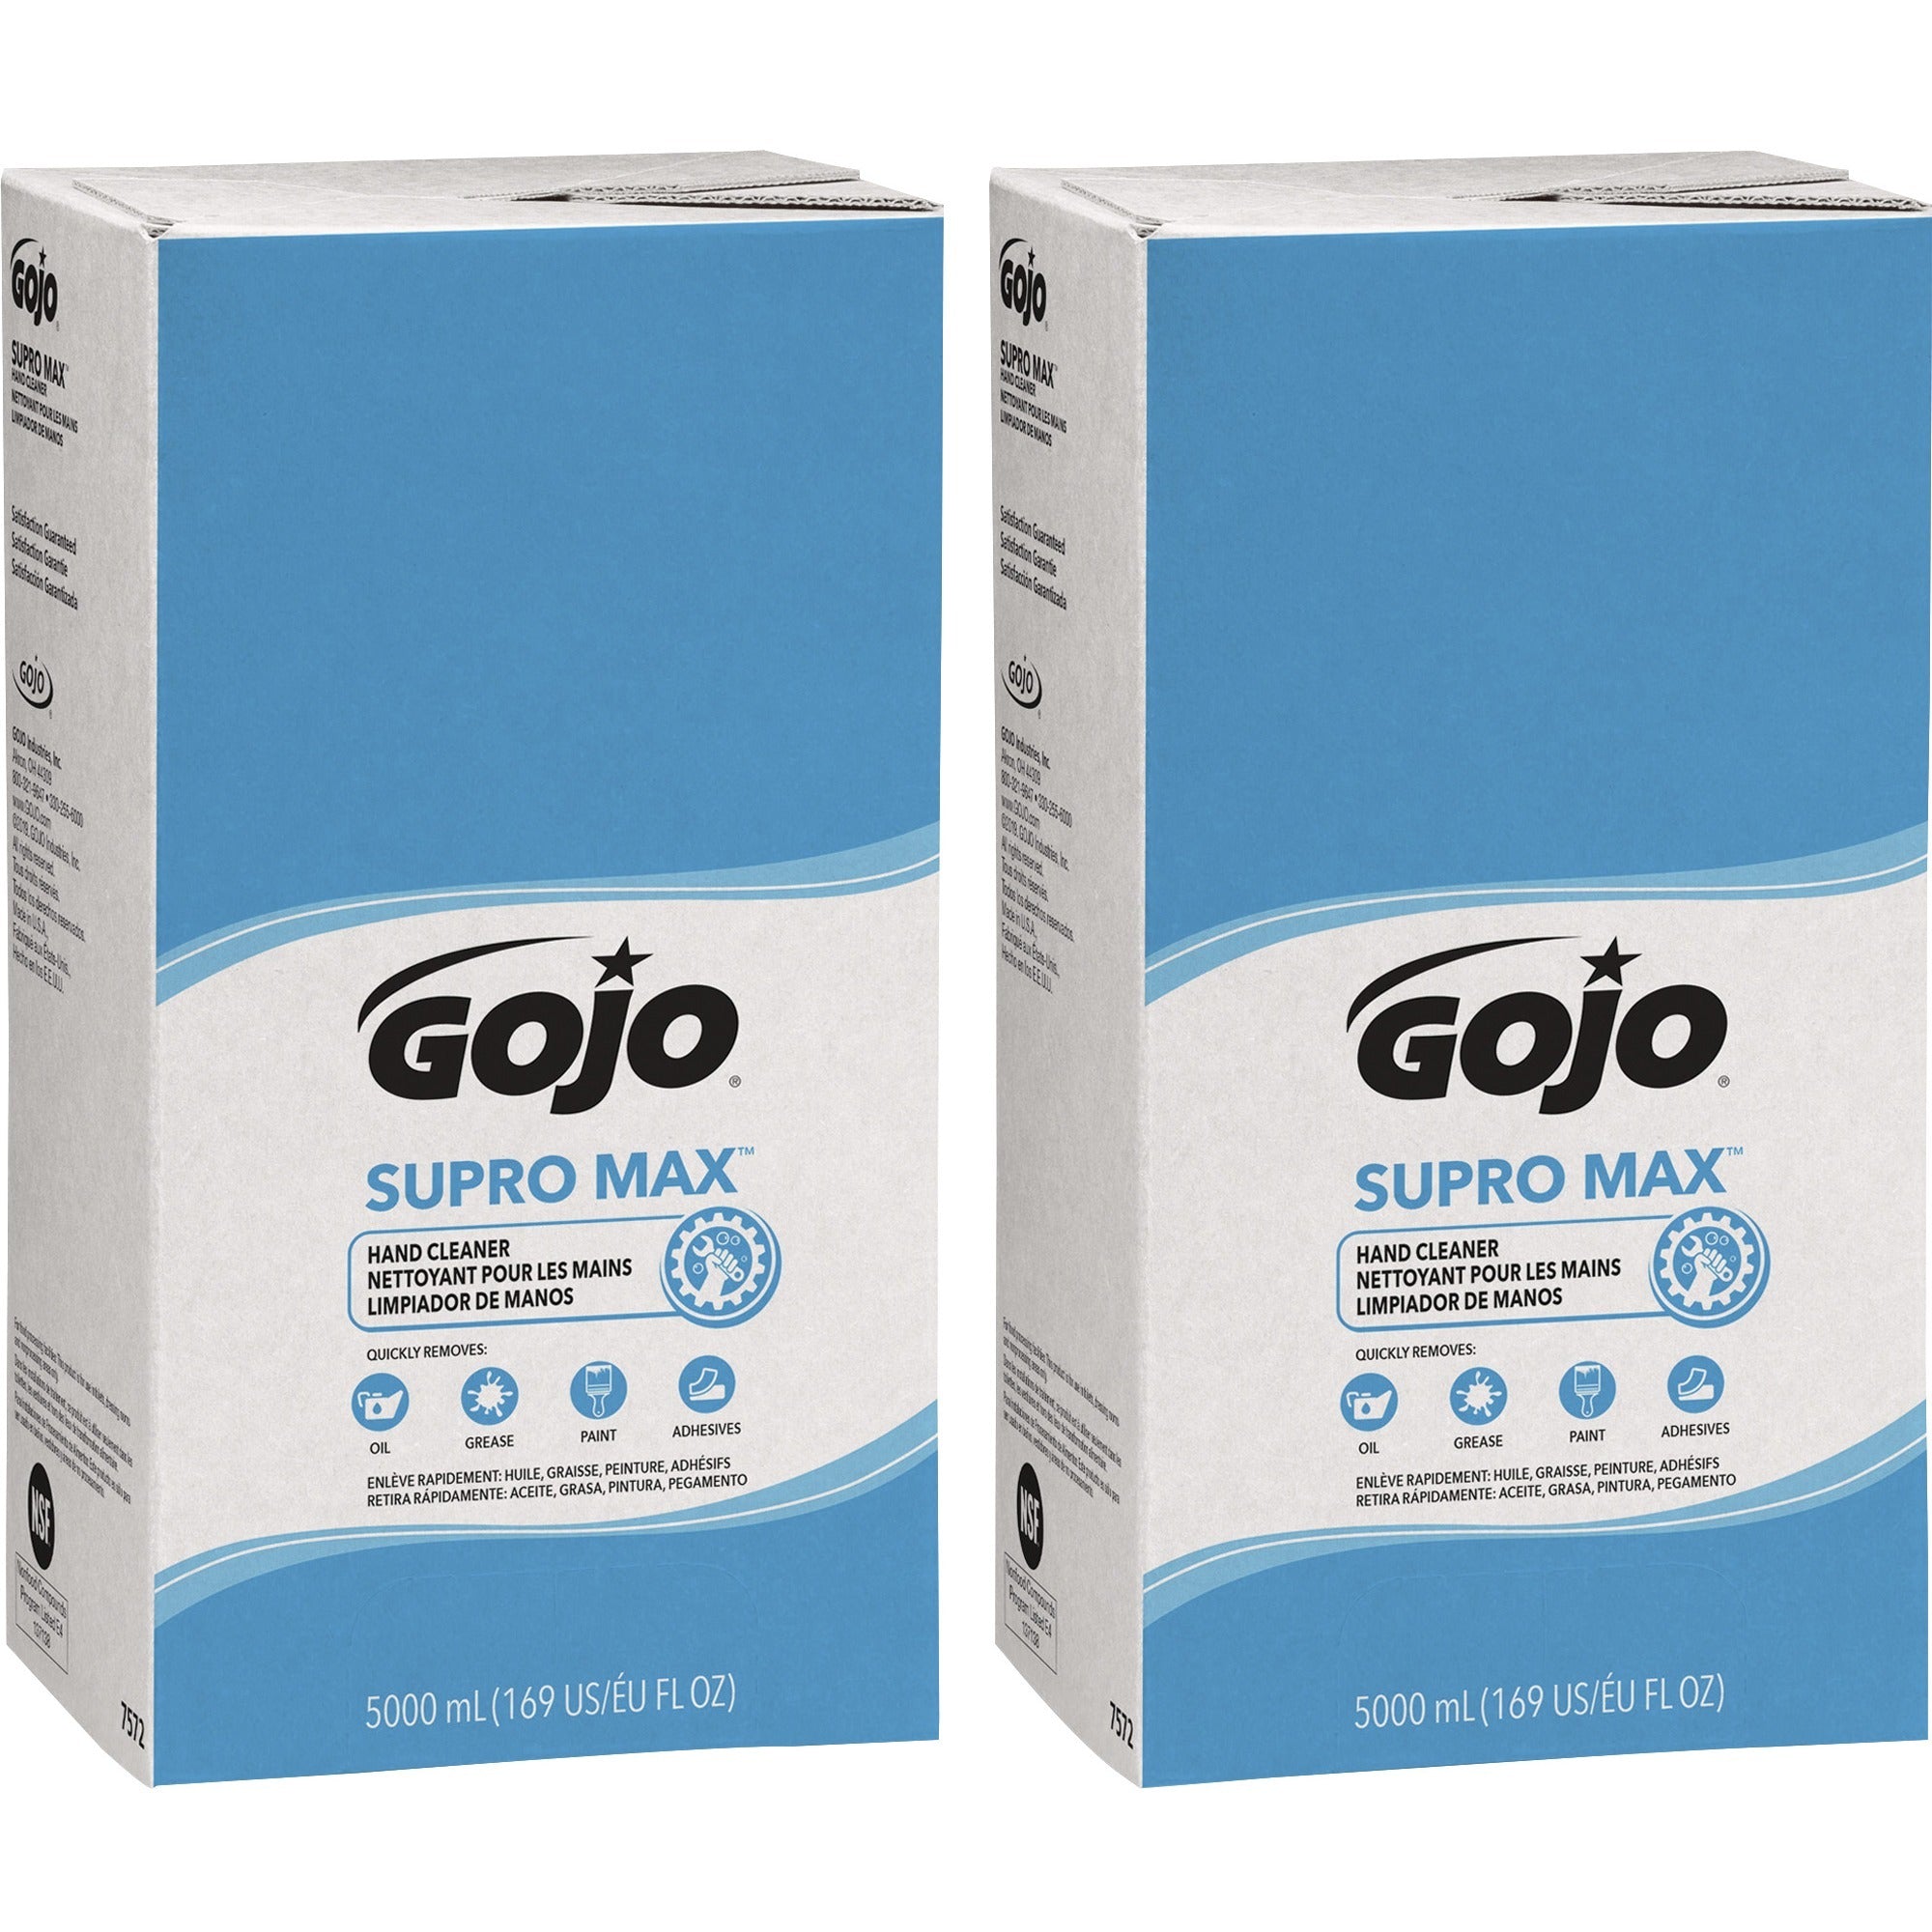 gojo-pro-tdx-refill-supro-max-hand-cleaner-13-gal-5-l-pump-bottle-dispenser-oil-remover-grease-remover-paint-remover-adhesive-remover-skin-moisturizing-beige-heavy-duty-bio-based-non-drying-2-carton_goj757202 - 1